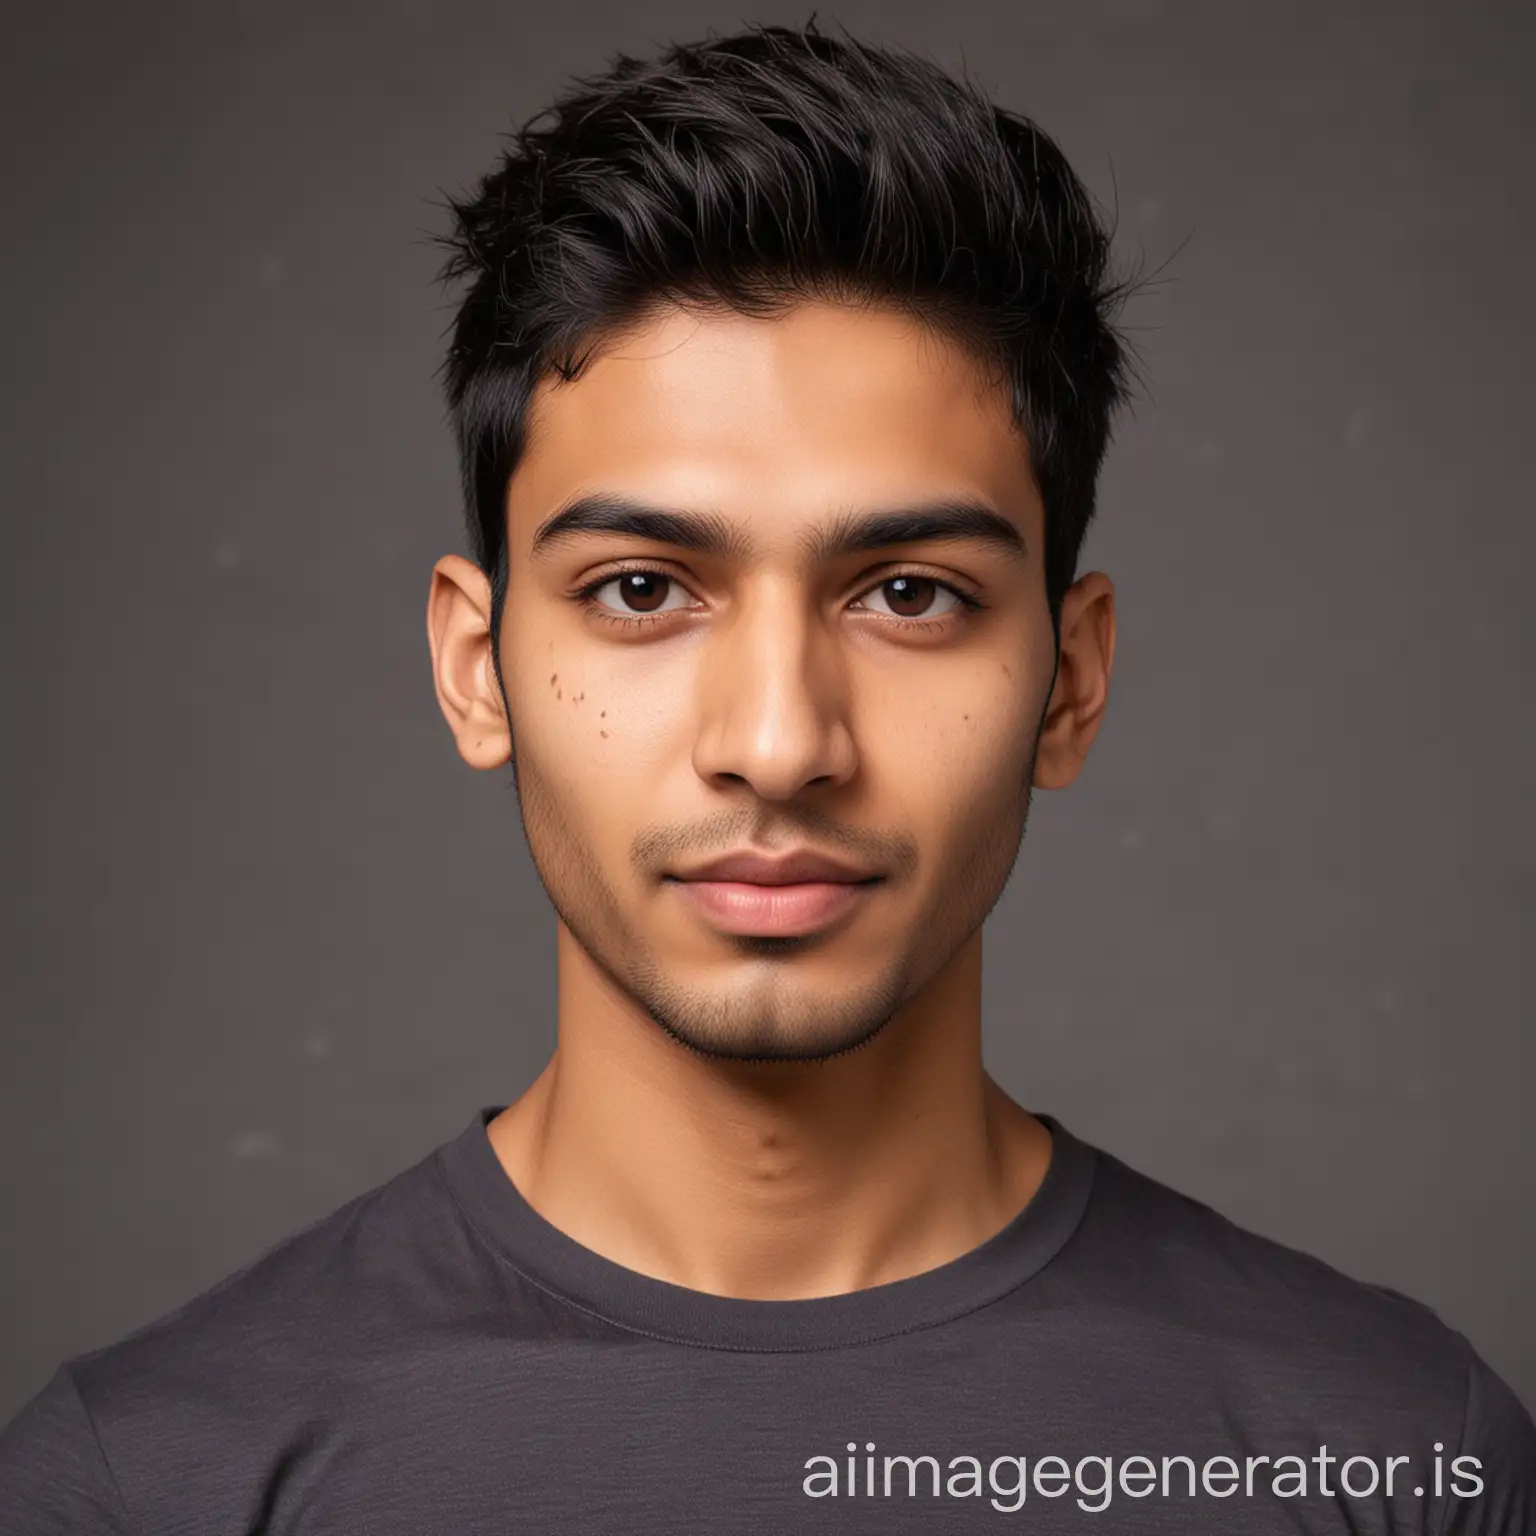 27-year-old Indian male with light brown skin tone, slightly acne-scarred fair skin, and a skinny neck, posing for a LinkedIn profile picture in a professional manner, wearing a well-fitted t-shirt and sporting a one-side cropped hairstyle.